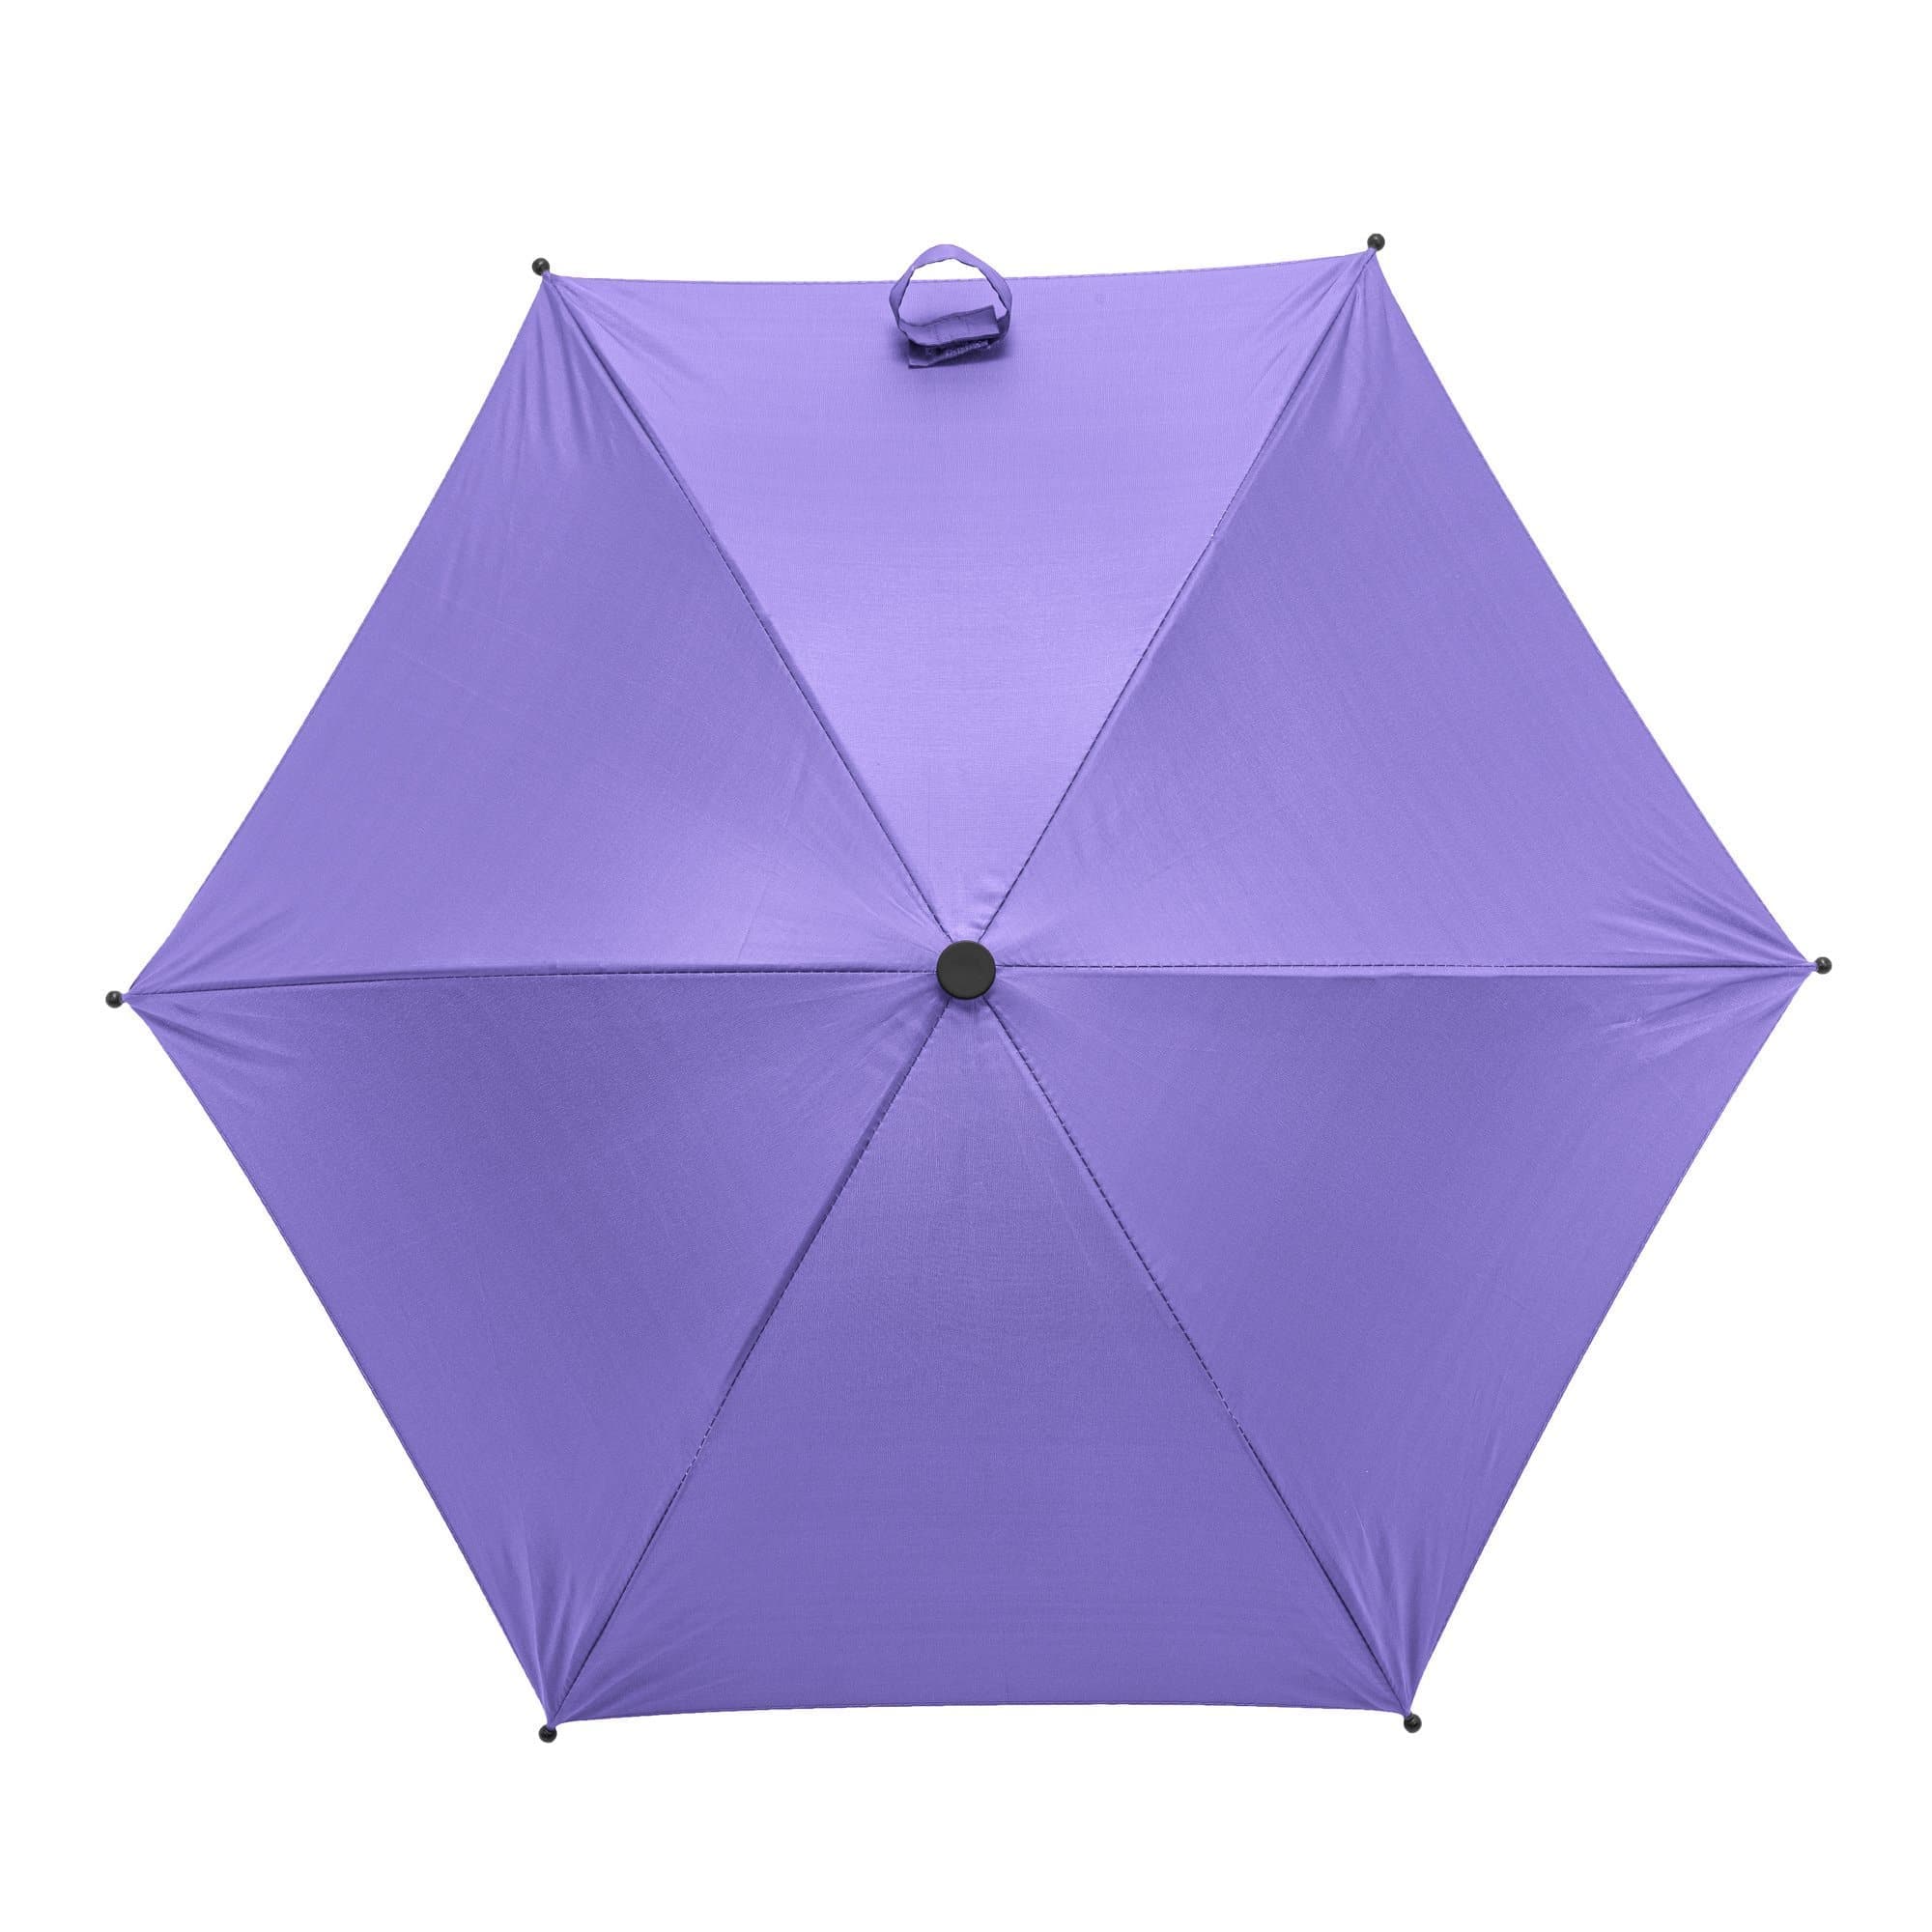 Baby Parasol Compatible With Hauck - Fits All Models - For Your Little One